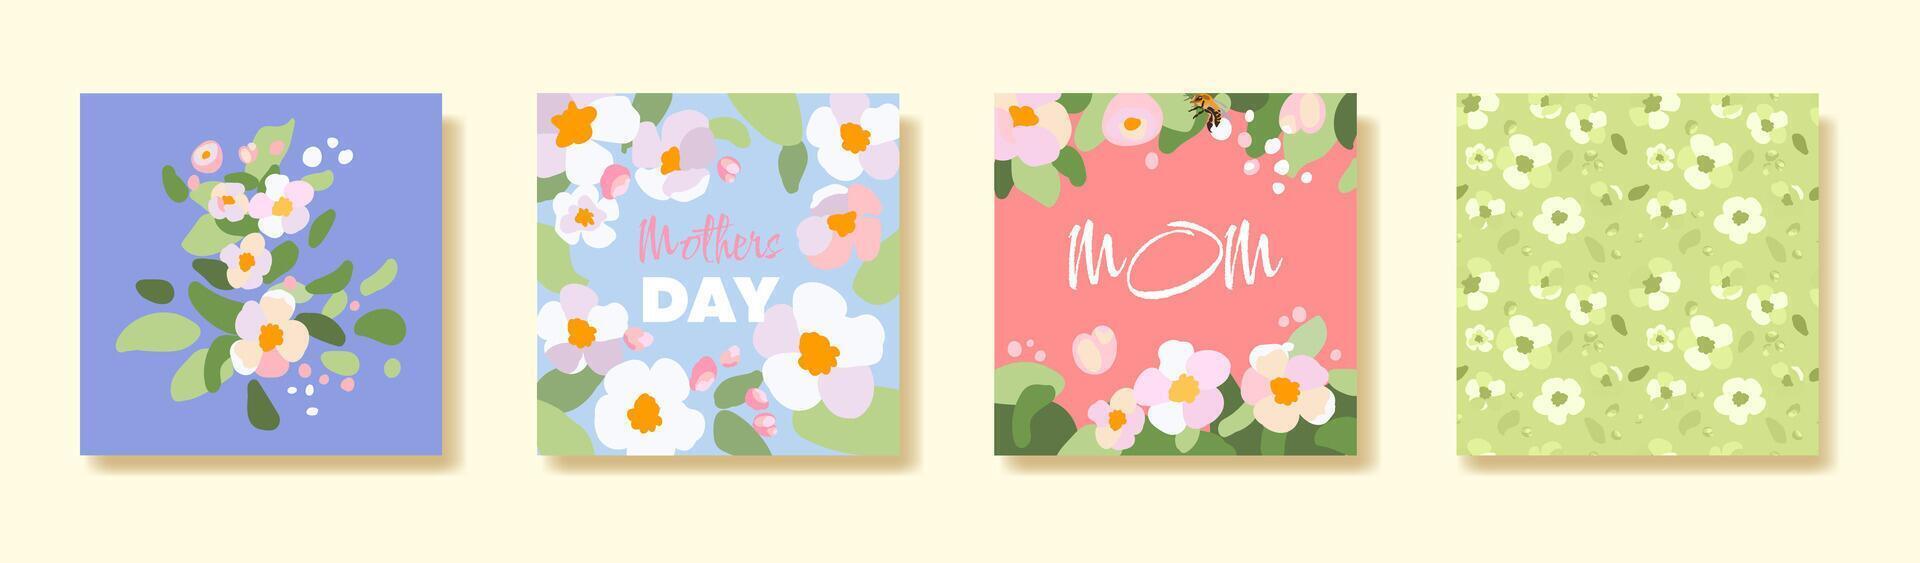 4 trendy square Mother's Day card Banner poster Flyer Sakura apple tree branch label or cover flowers frame floral pattern Retro art style Spring summer floral template ads promo vector